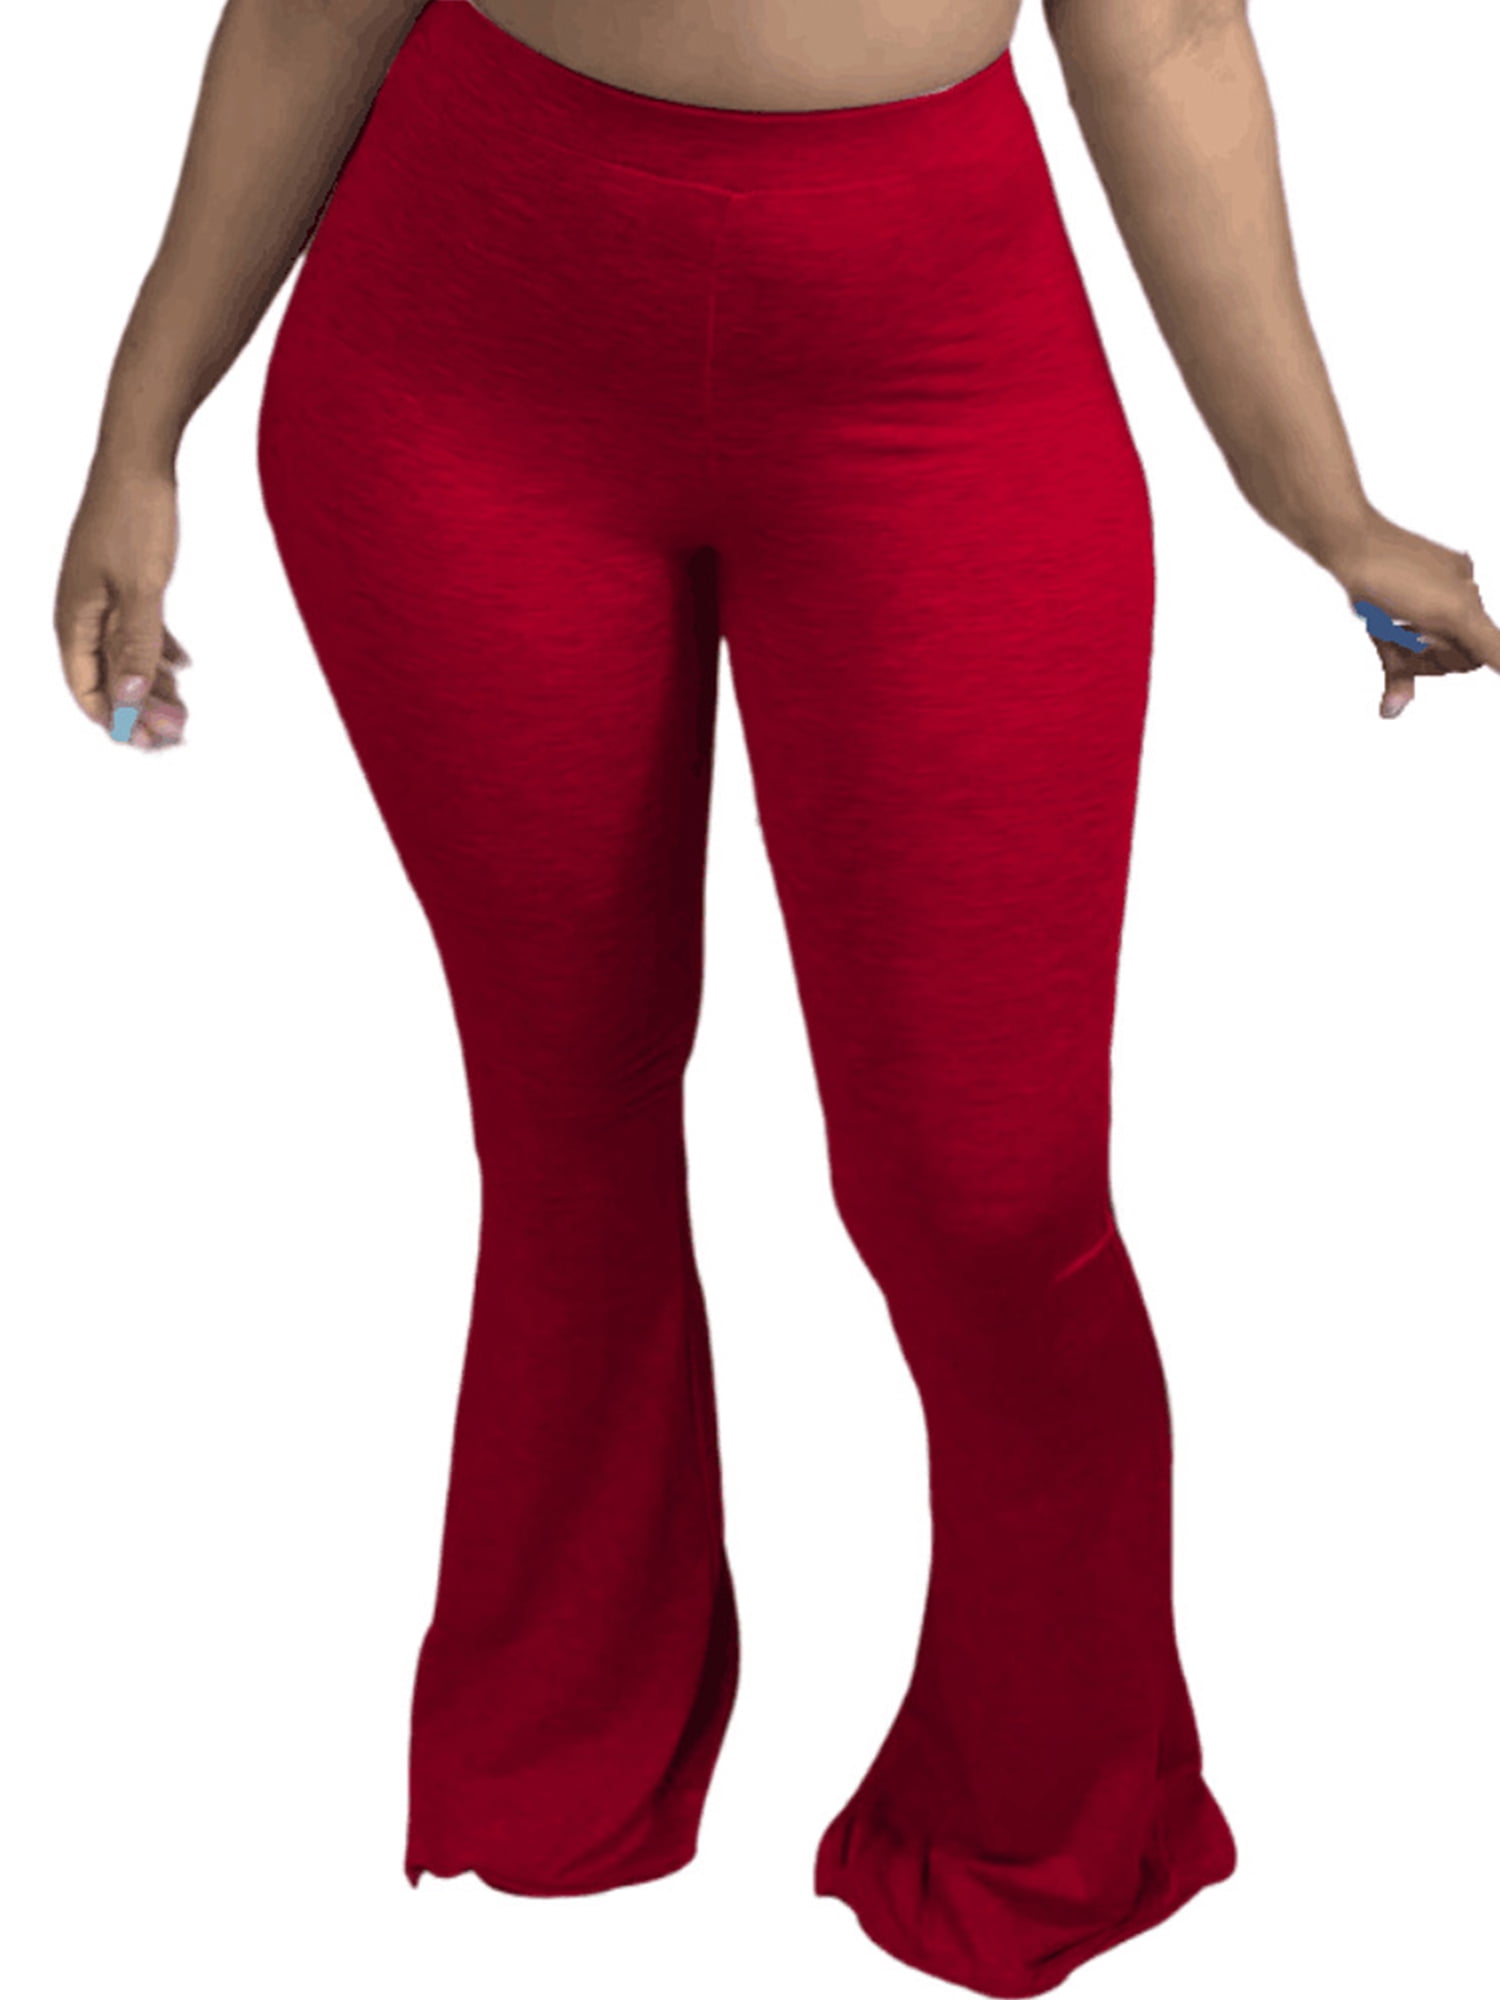 red high waisted bell bottom pants